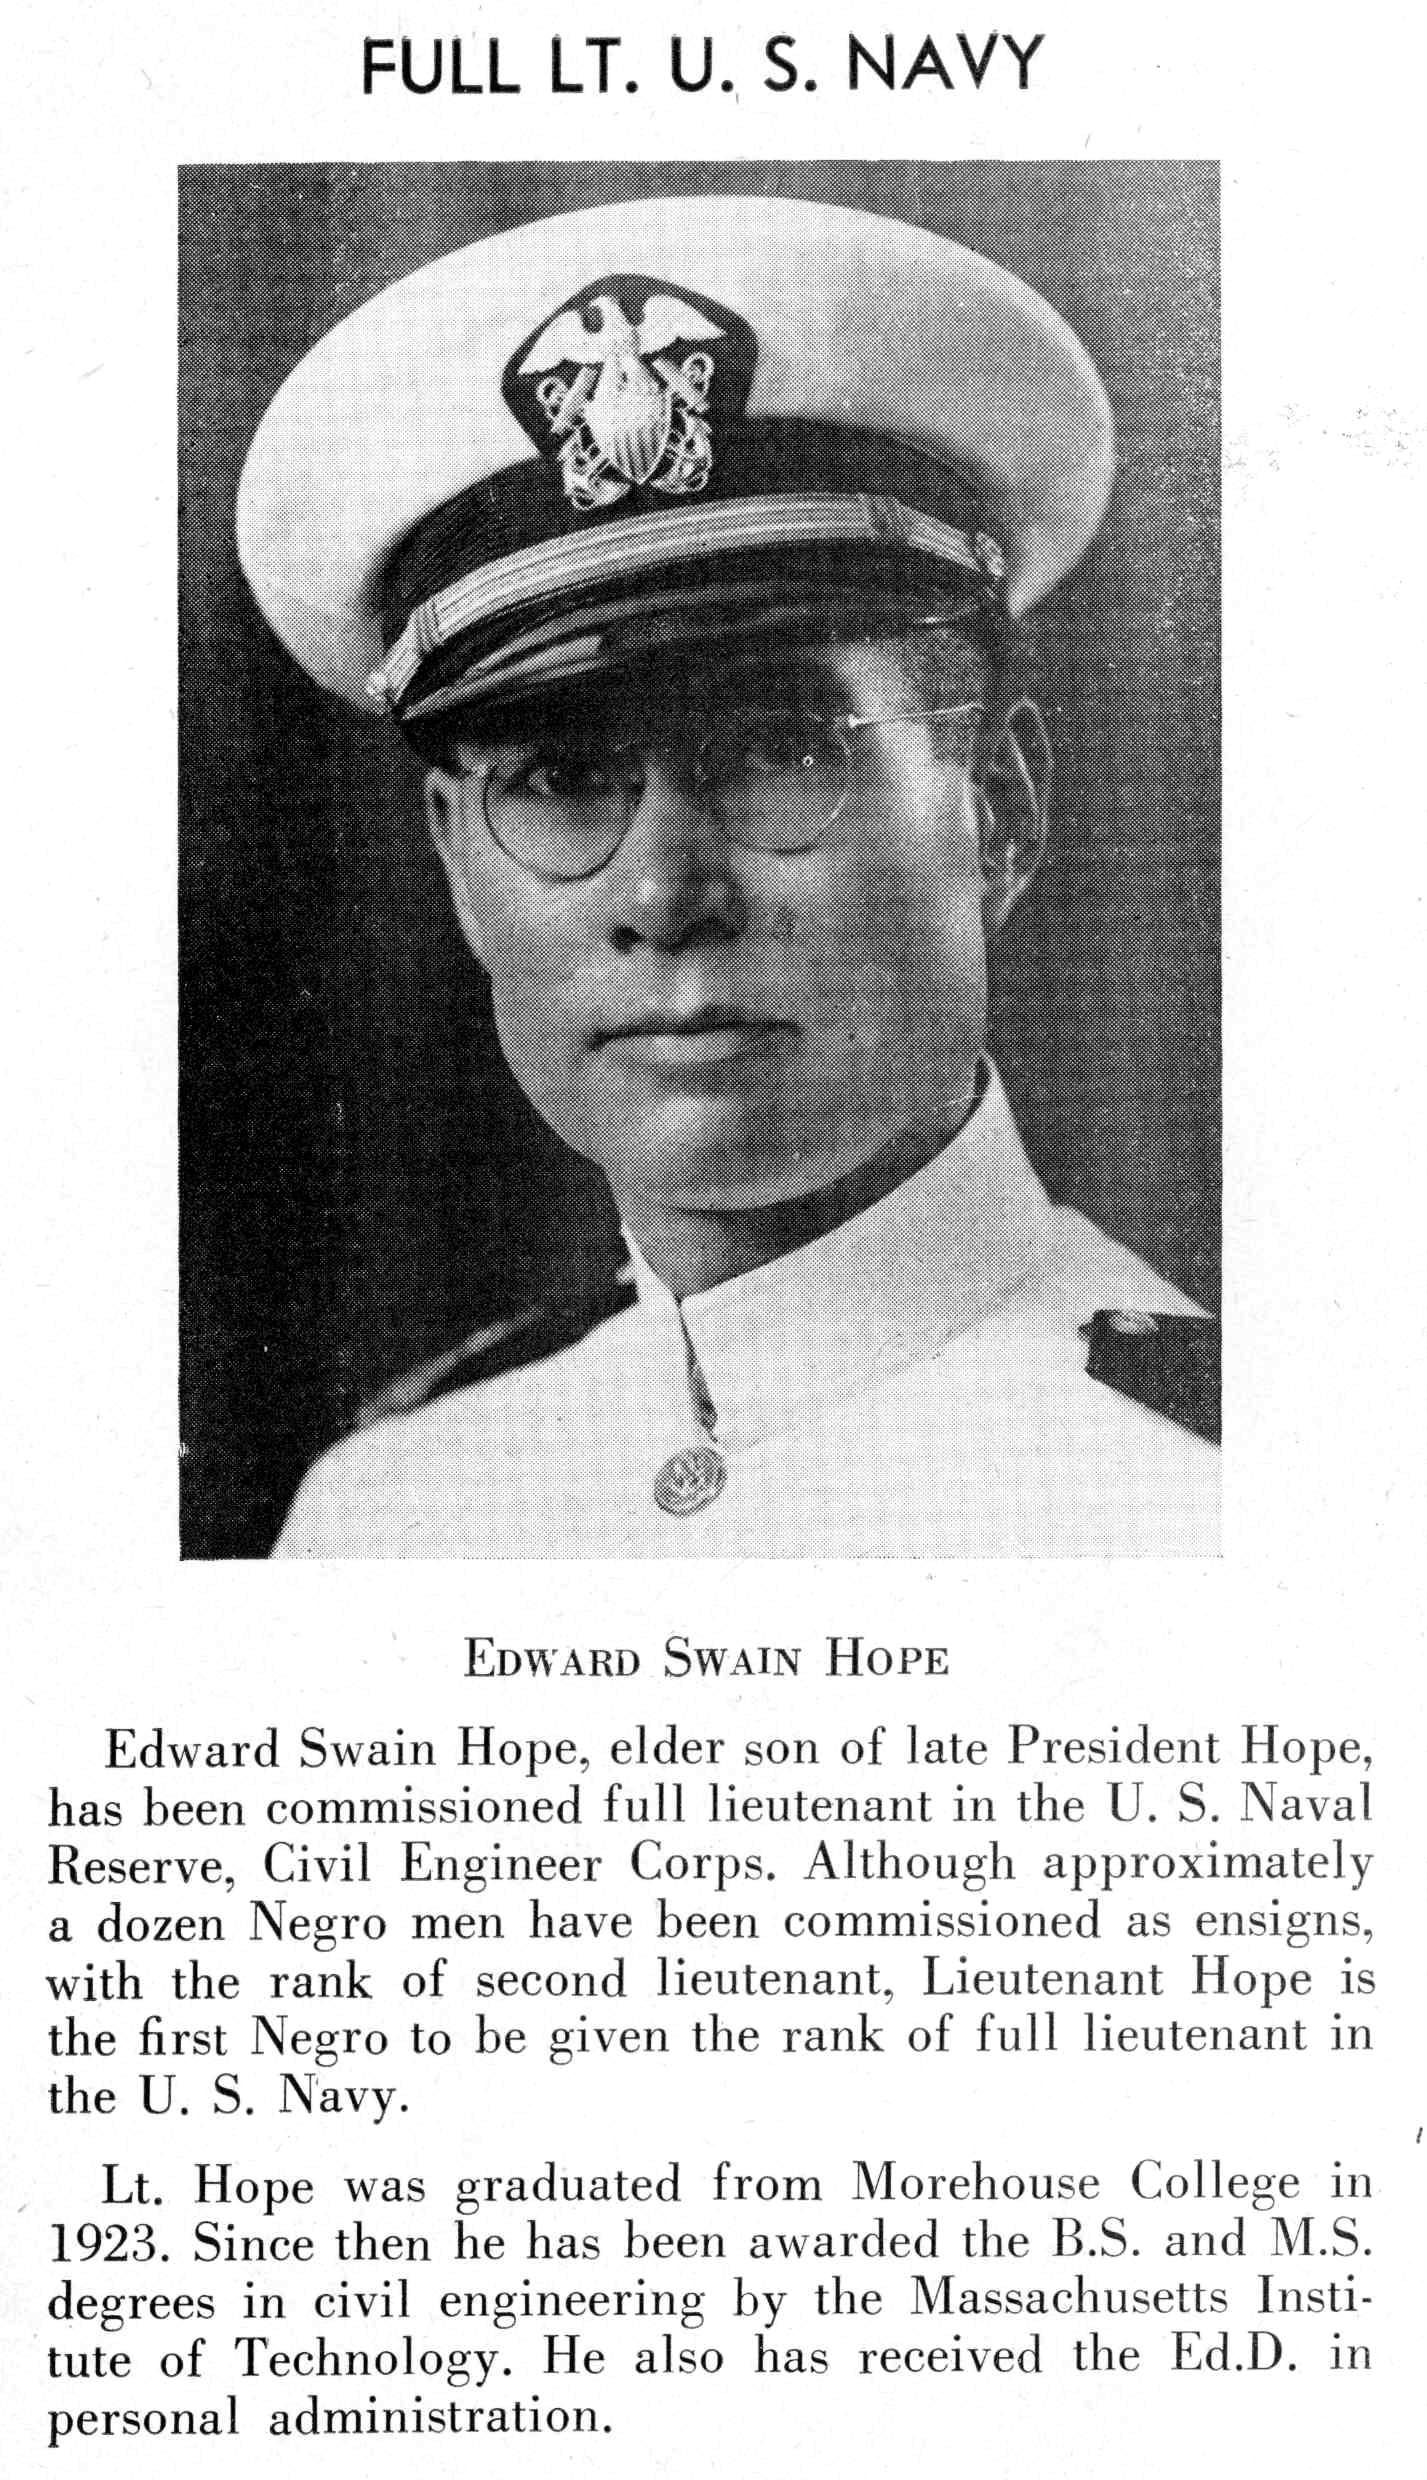 Photograph of Lt. Edward Swain Hope of US Navy, The Maroon Tiger, Volume 4, No. 1, Morehouse College (Atlanta, Ga.), 1944, Morehouse College printed and published materials